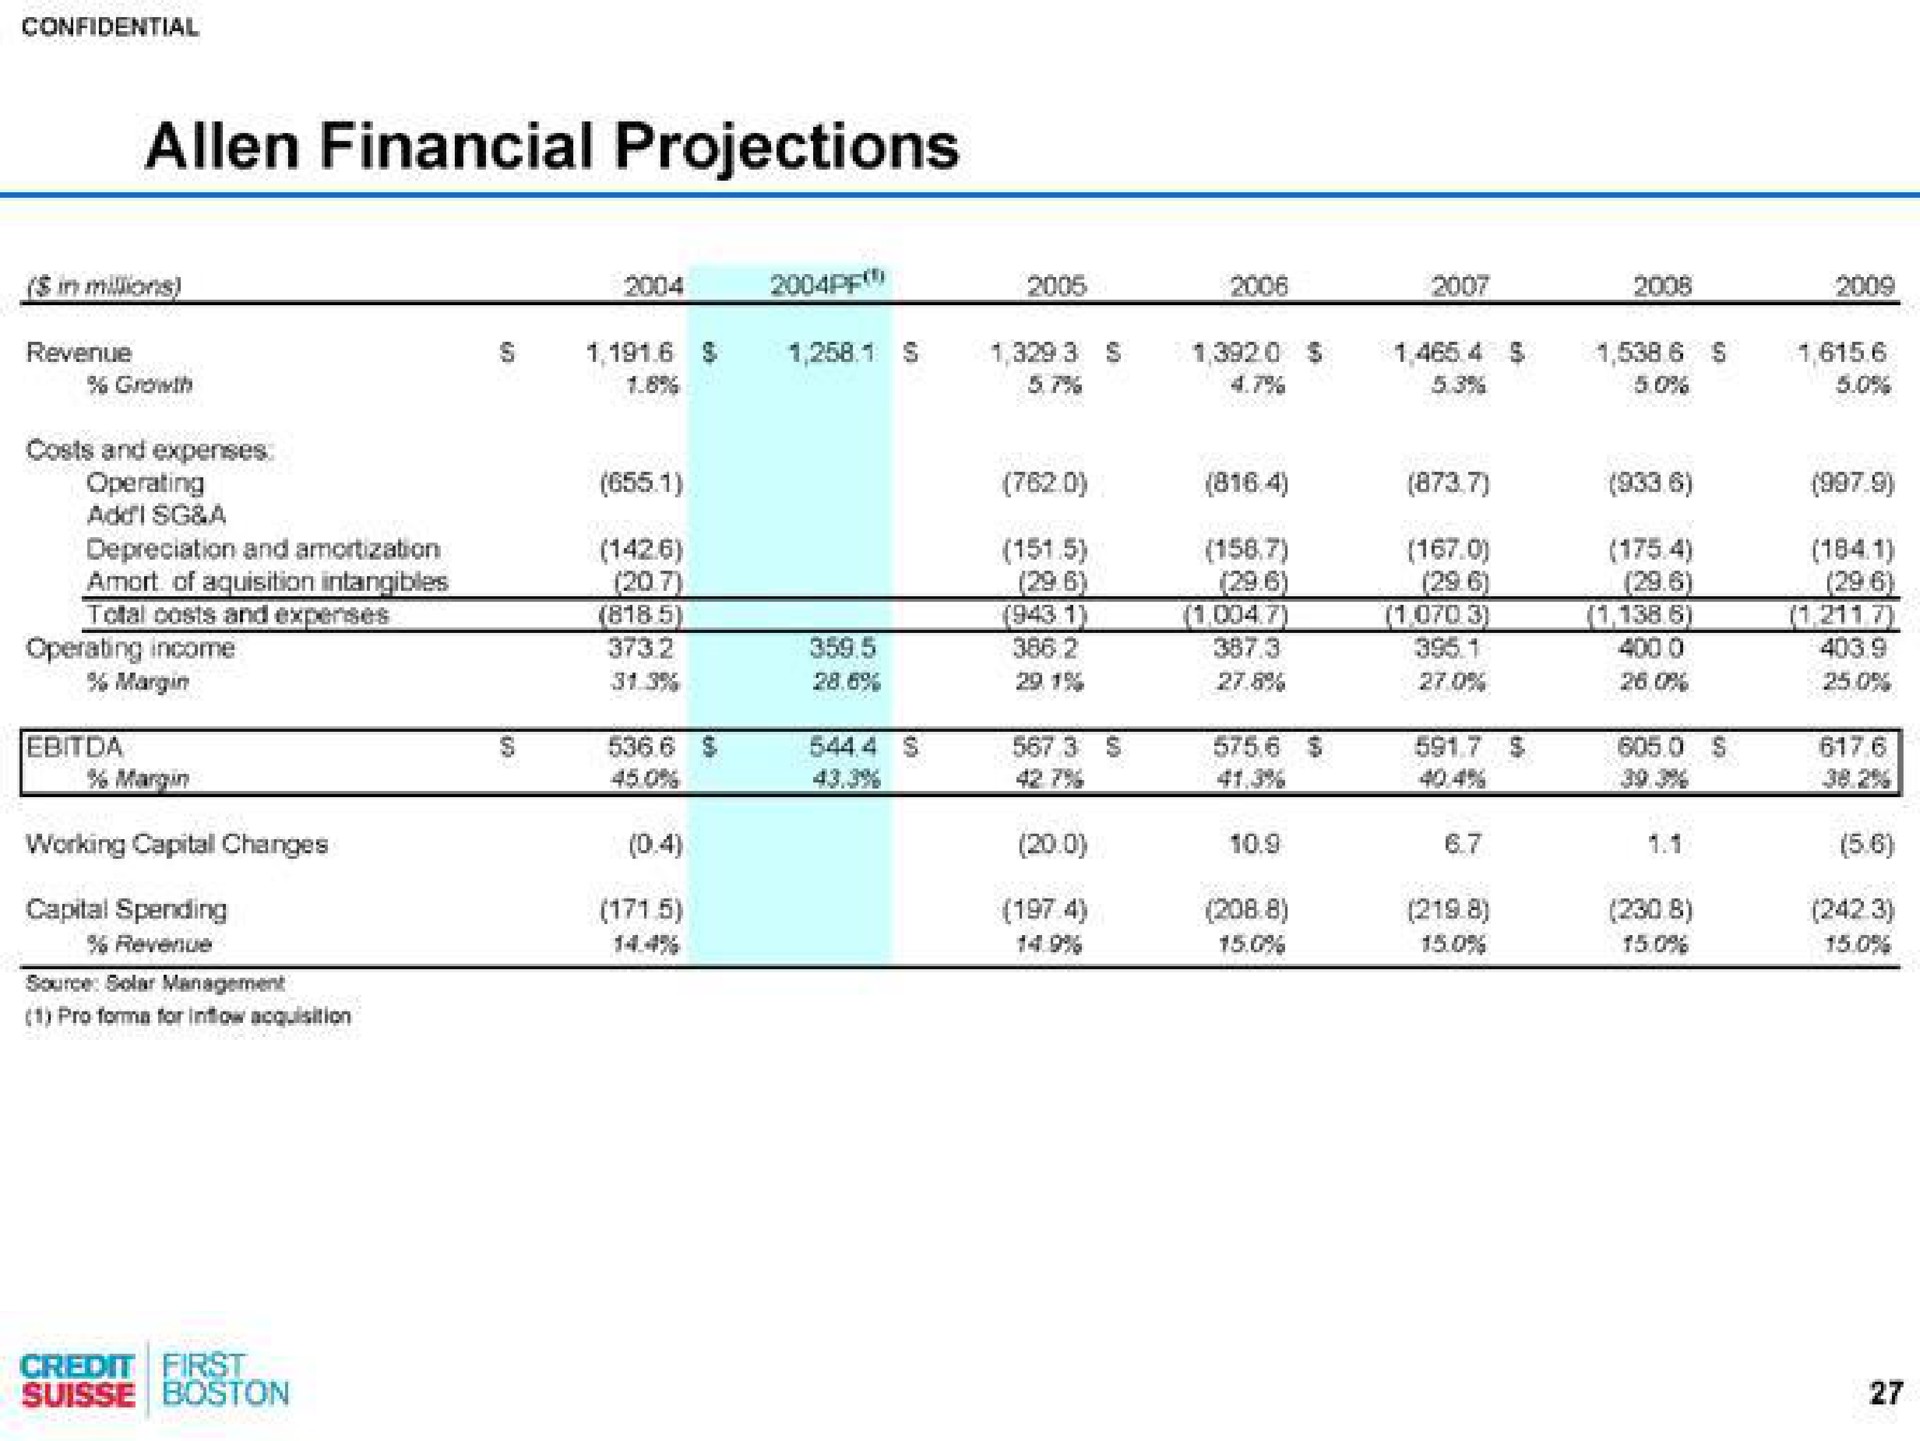 financial projections | Credit Suisse